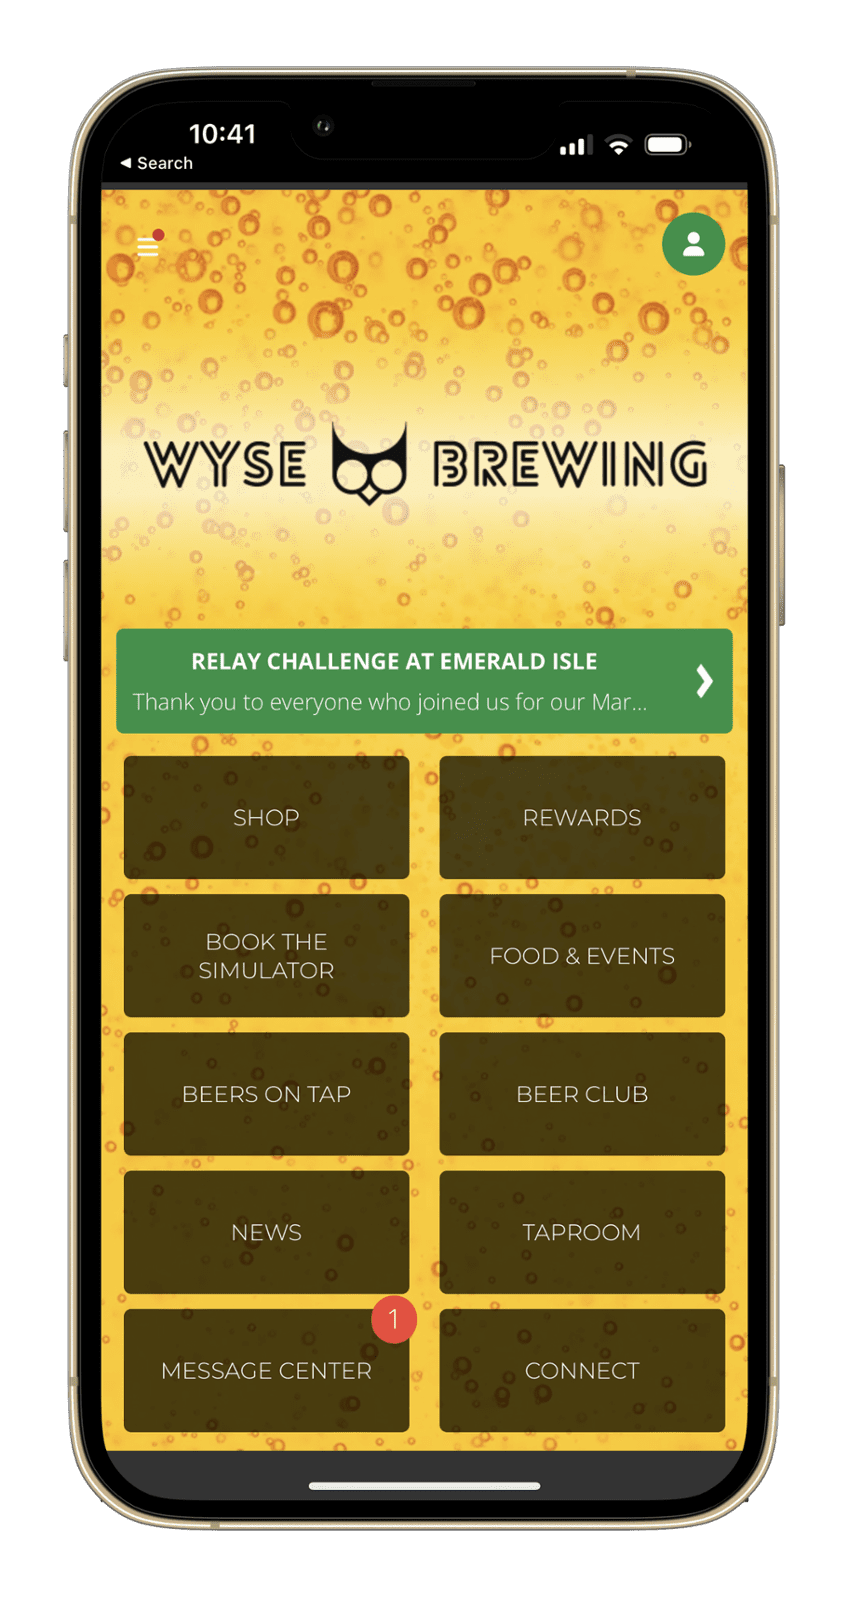 Brewery App, Message Center Notifications Highlighted